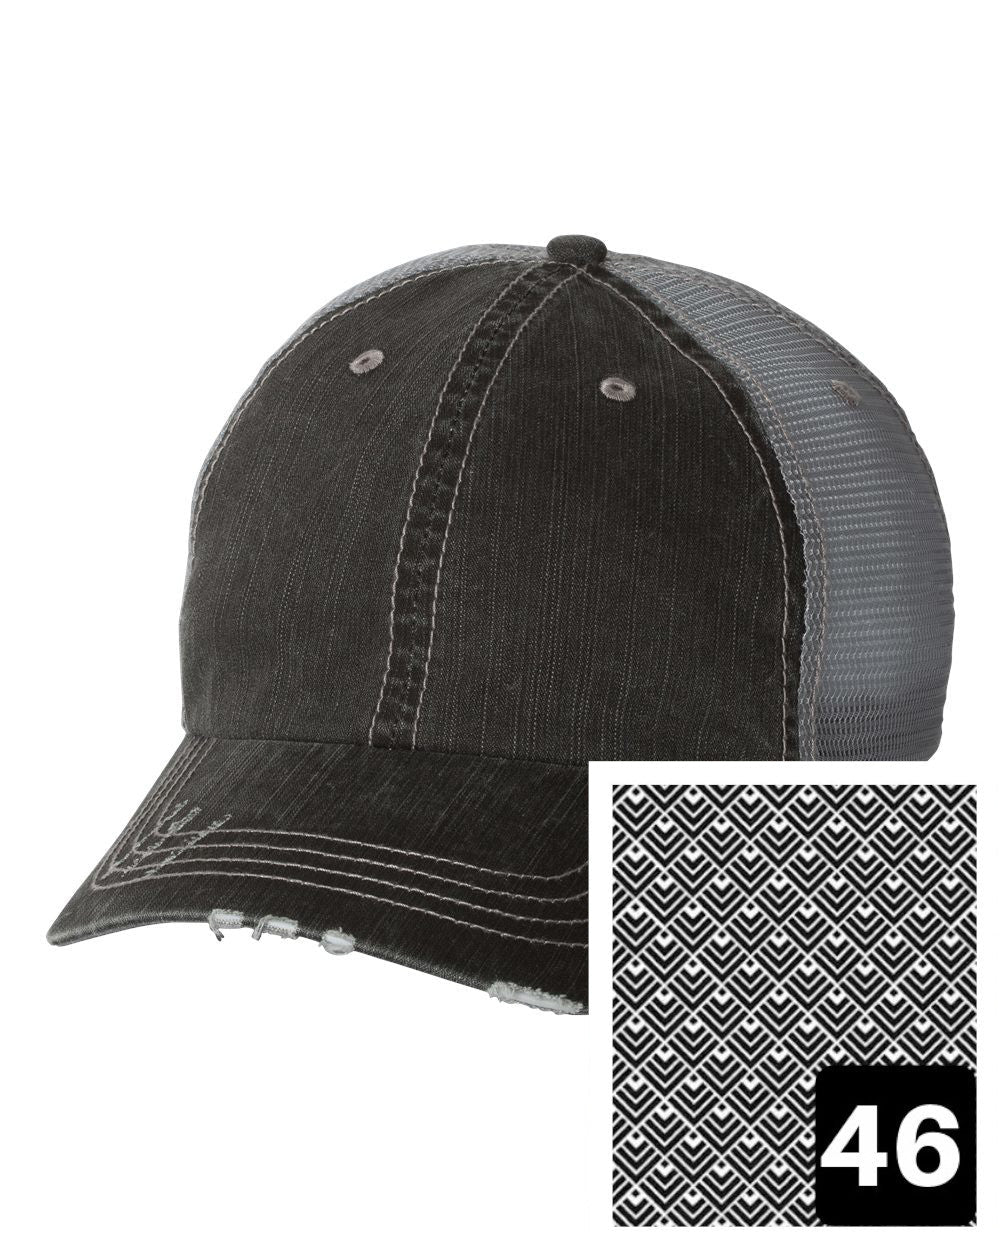 gray distressed trucker hat with multi-color floral on white fabric state of Connecticut